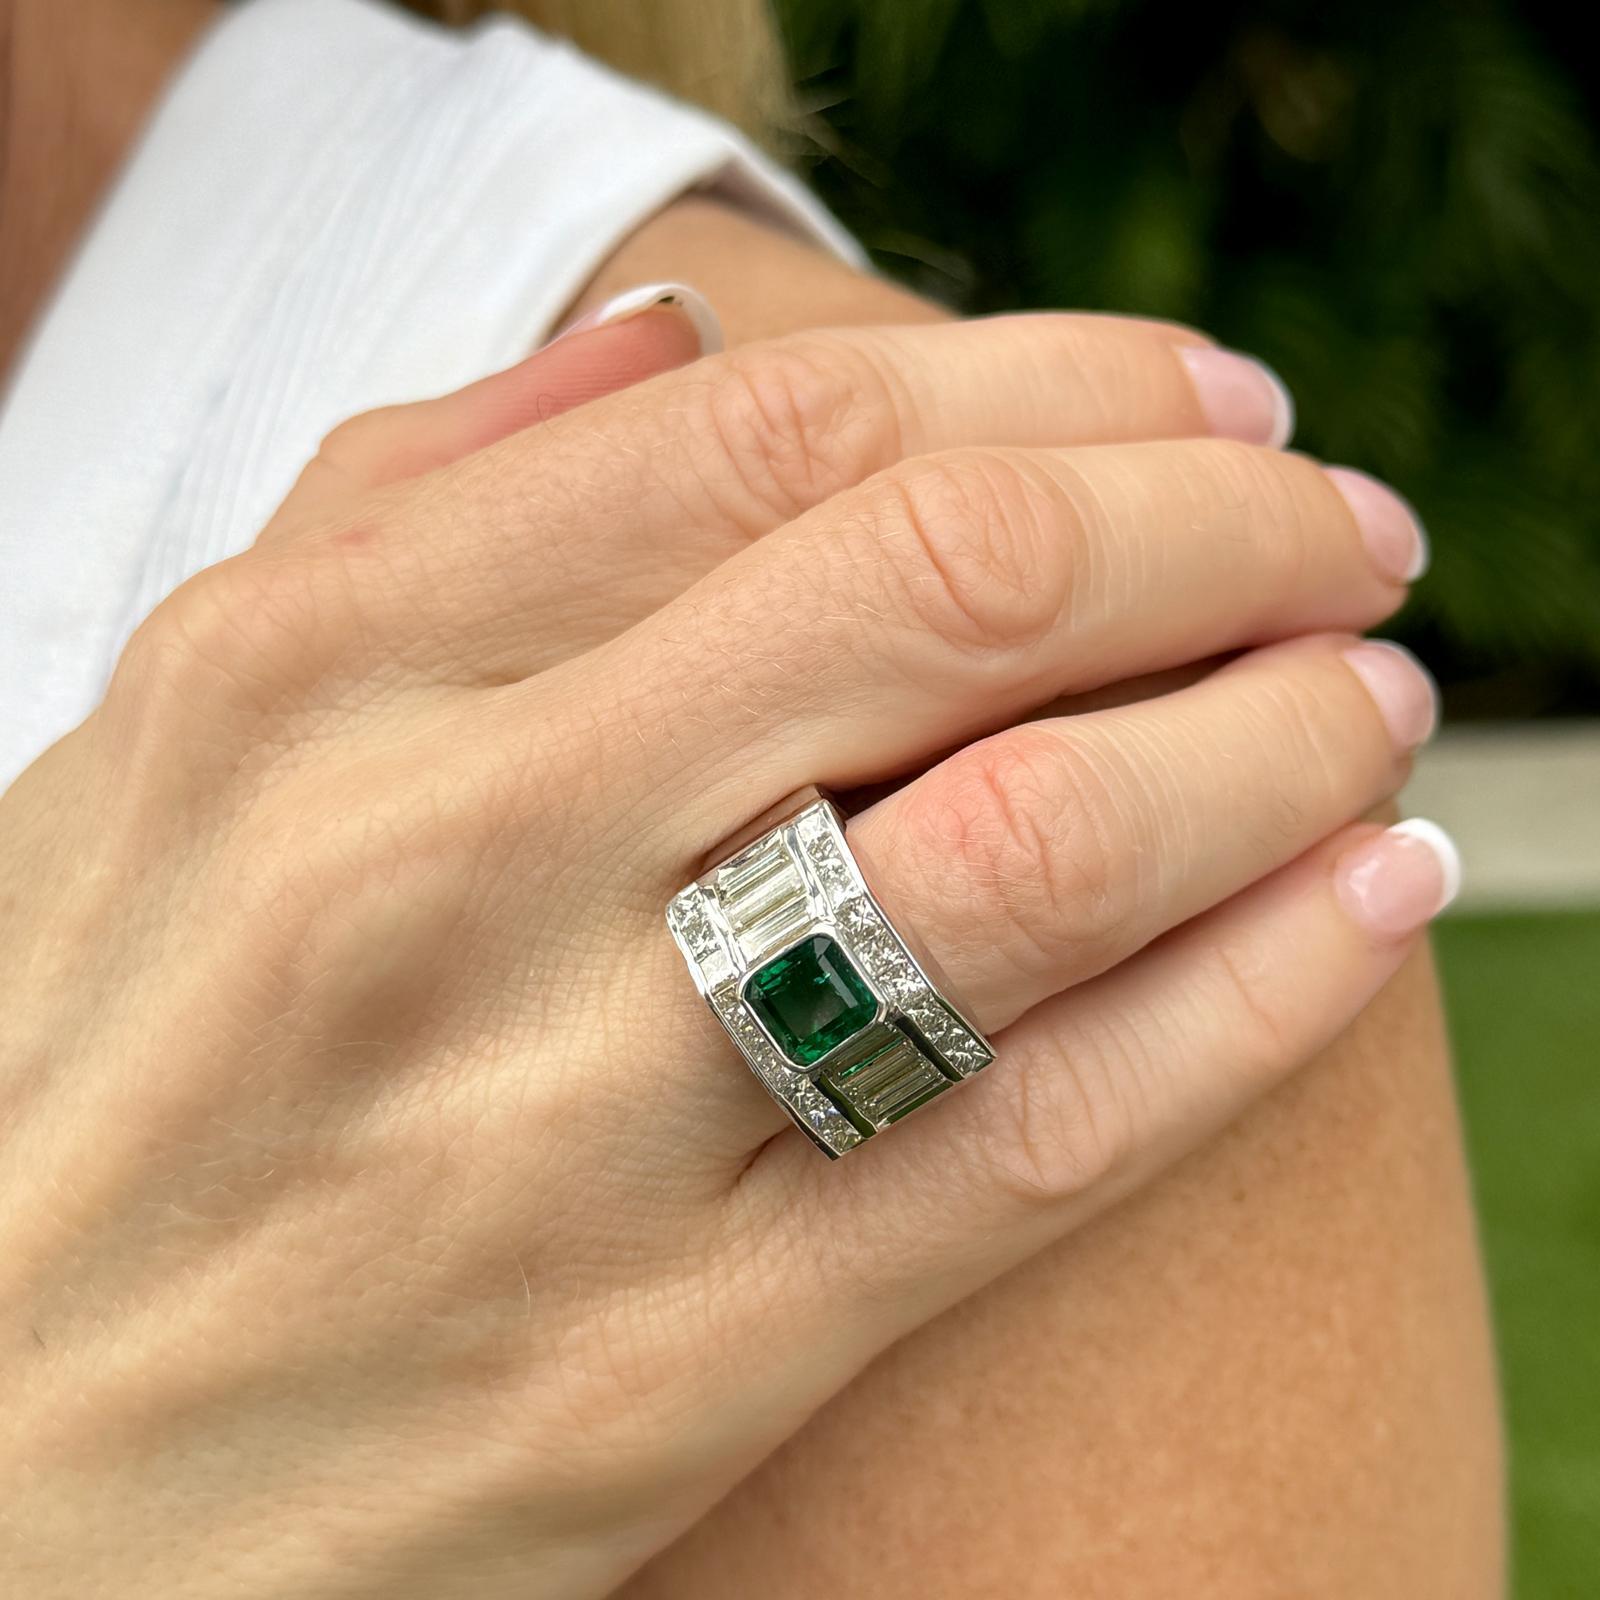 Beautiful bezel set emerald and diamond band crafted in 18 karat white gold. The approximately 1.71 carat natural green emerald is bezel set with surrounding baguette and princess cut diamonds weighing approximately 3.36 carat total weight. The